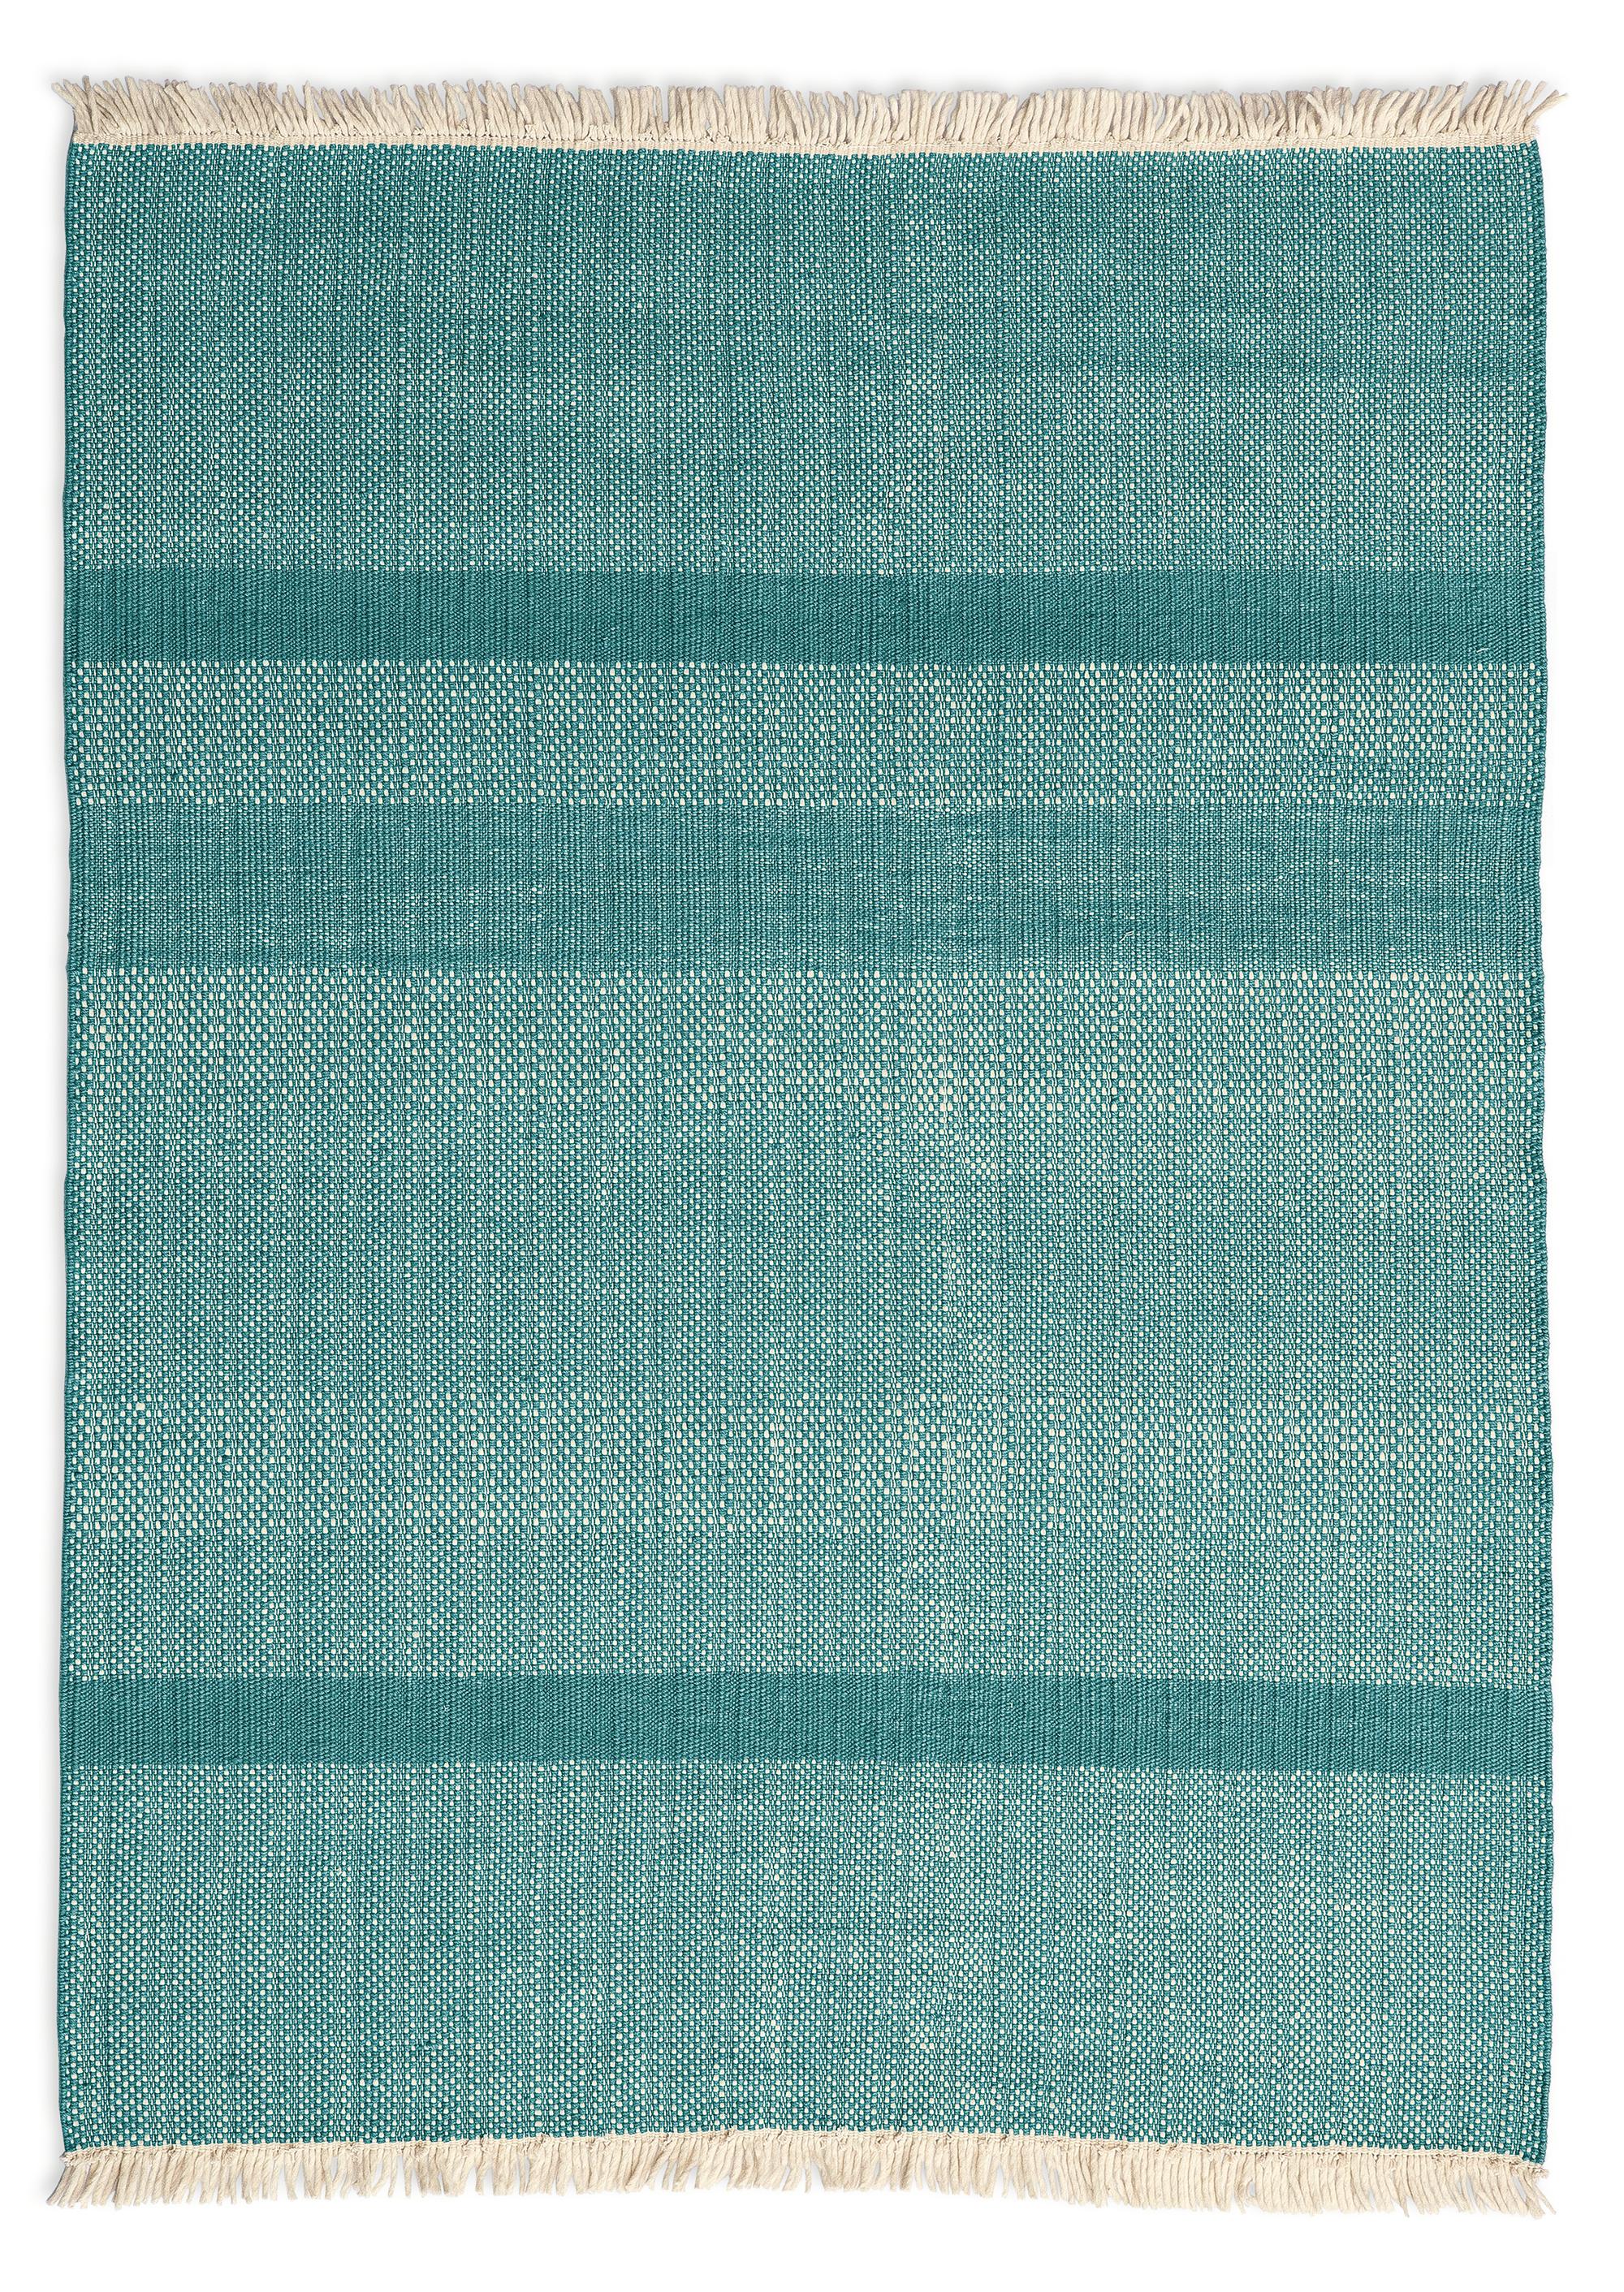 Wool Small 'Tres Texture' Hand-Loomed Rug for Nanimarquina For Sale